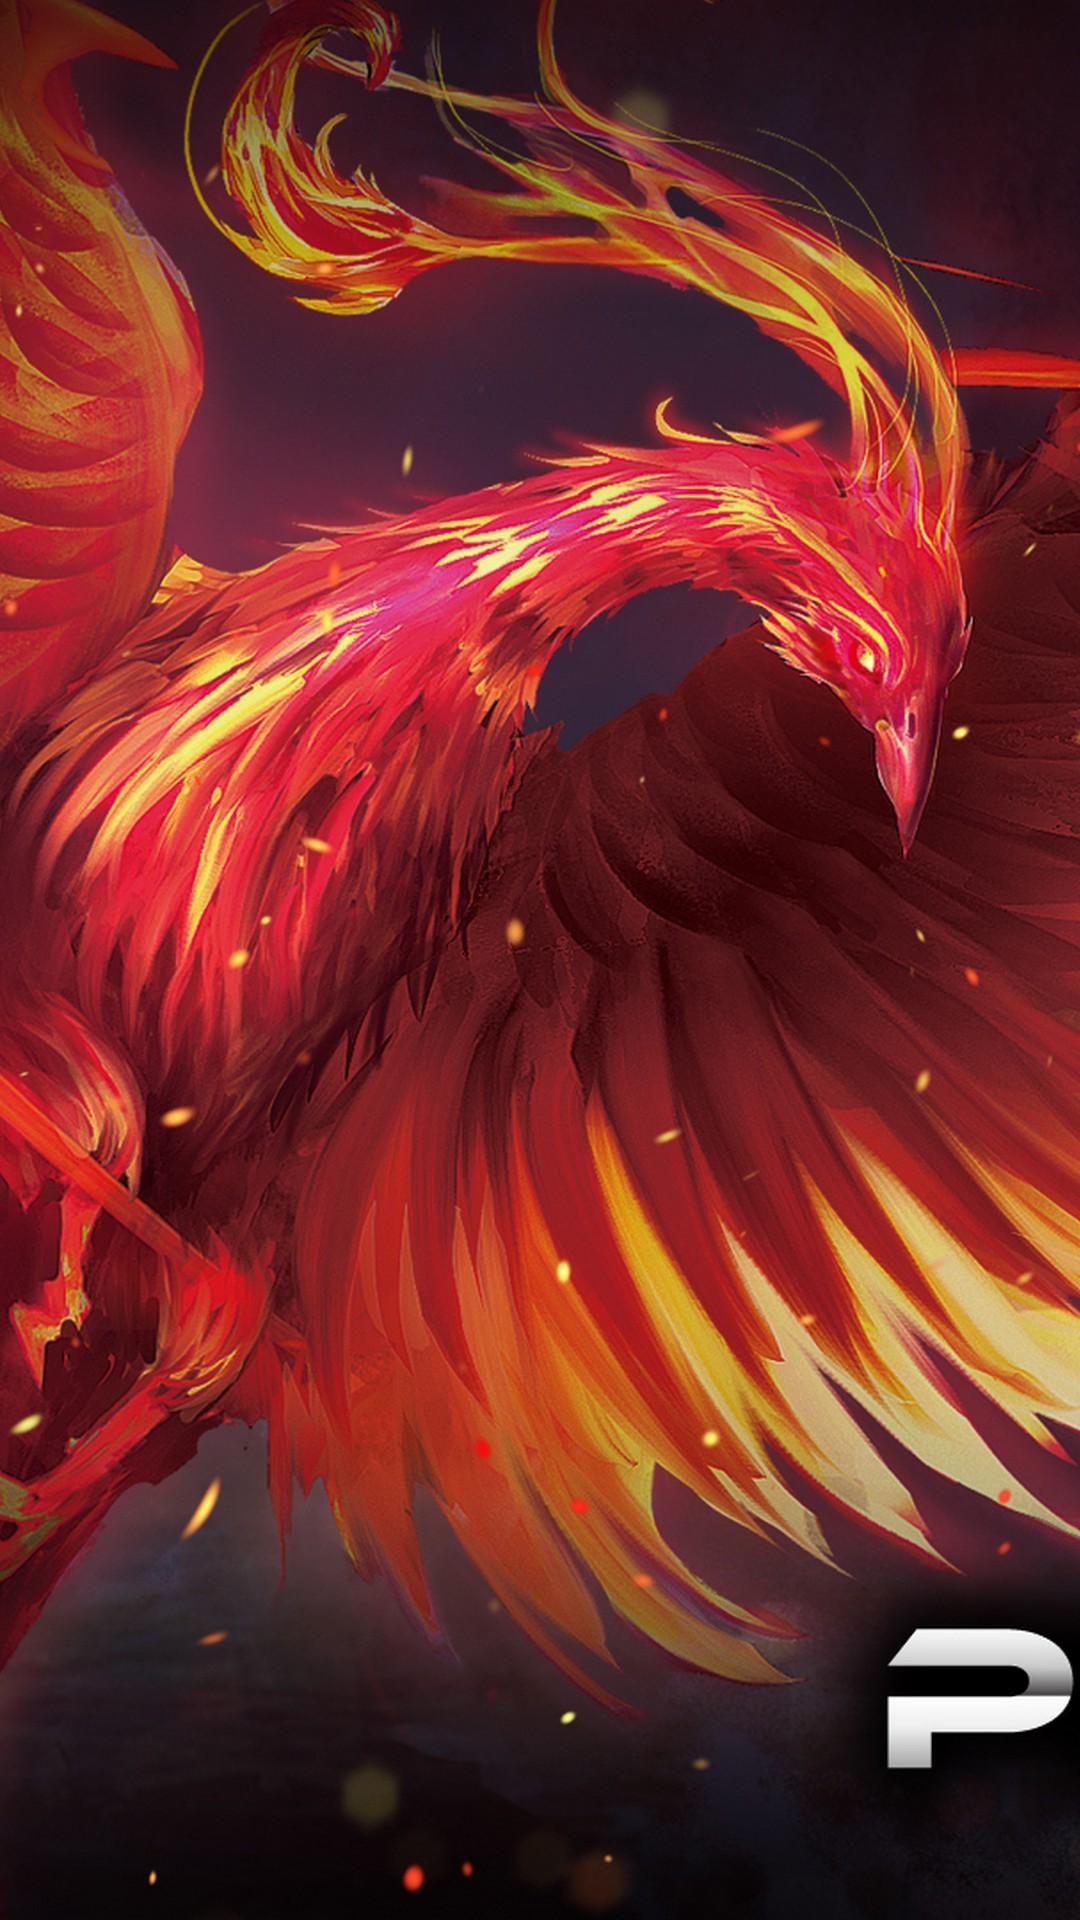 Android Wallpaper Phoenix Images with resolution 1080X1920 pixel. You can make this wallpaper for your Android backgrounds, Tablet, Smartphones Screensavers and Mobile Phone Lock Screen